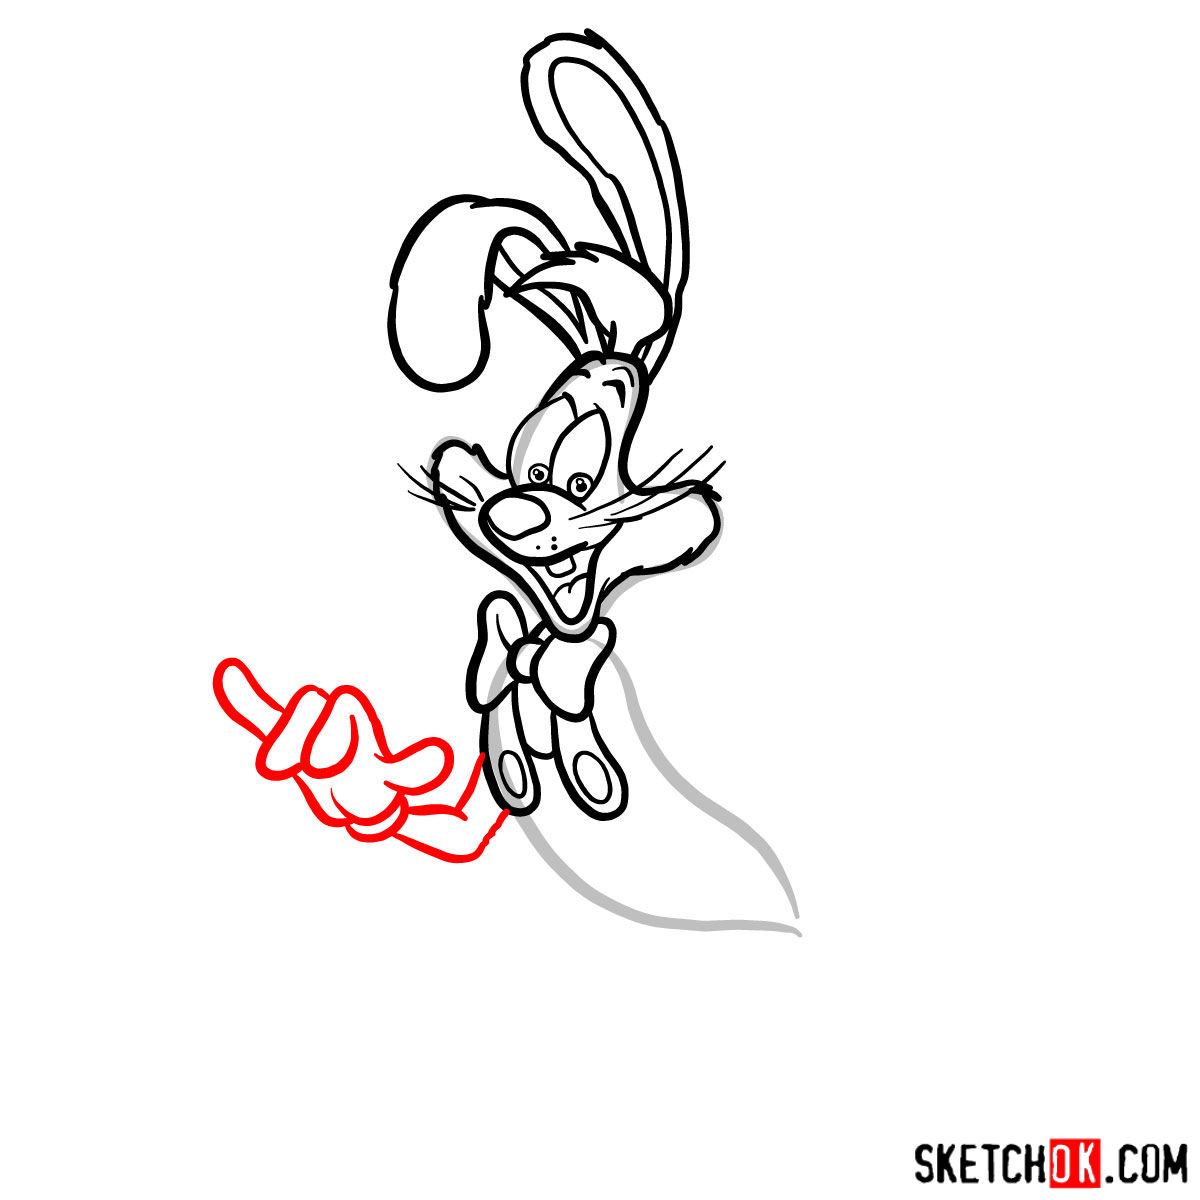 How to draw Roger Rabbit - step 08